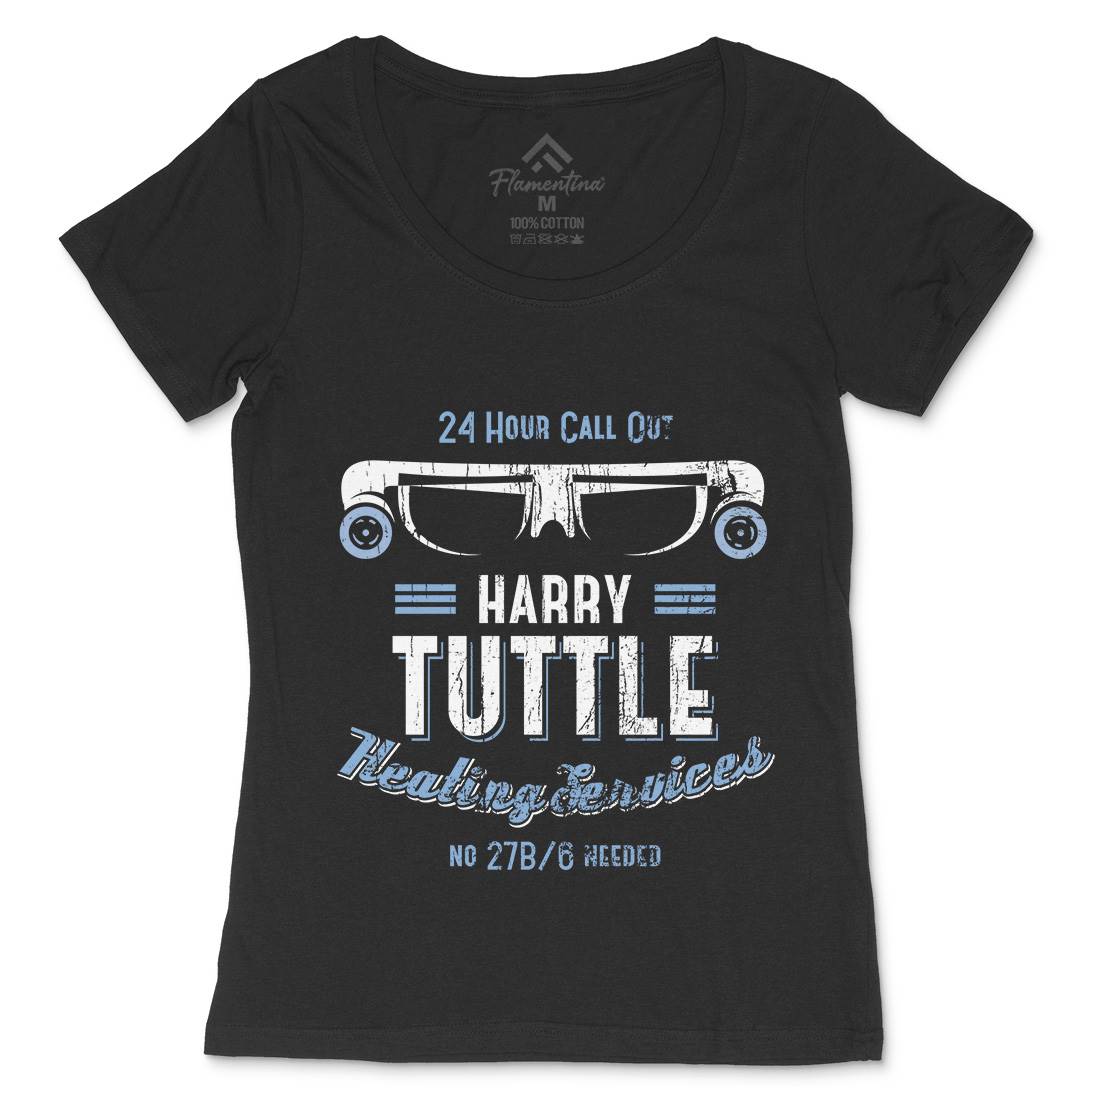 Tuttle Heating Services Womens Scoop Neck T-Shirt Work D301